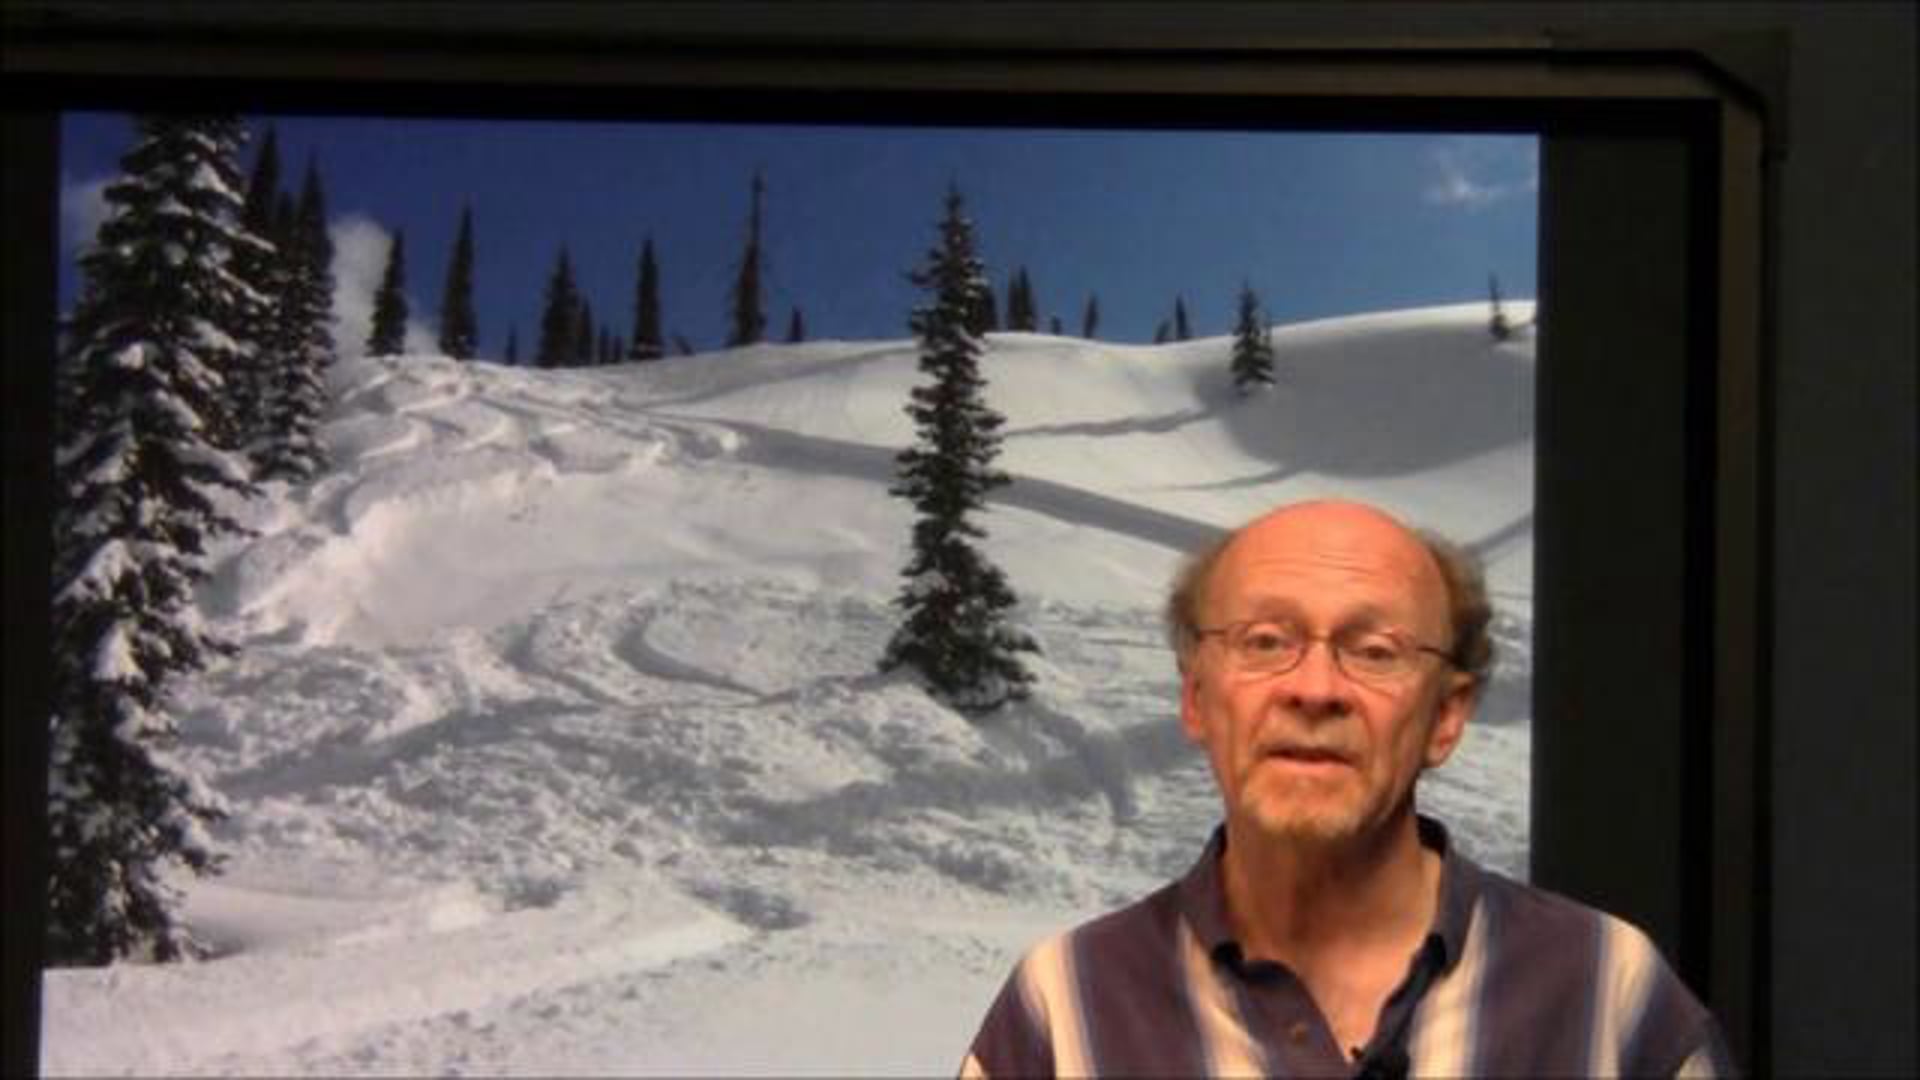 SWarm - Forecasting daytime warming of the upper snowpack